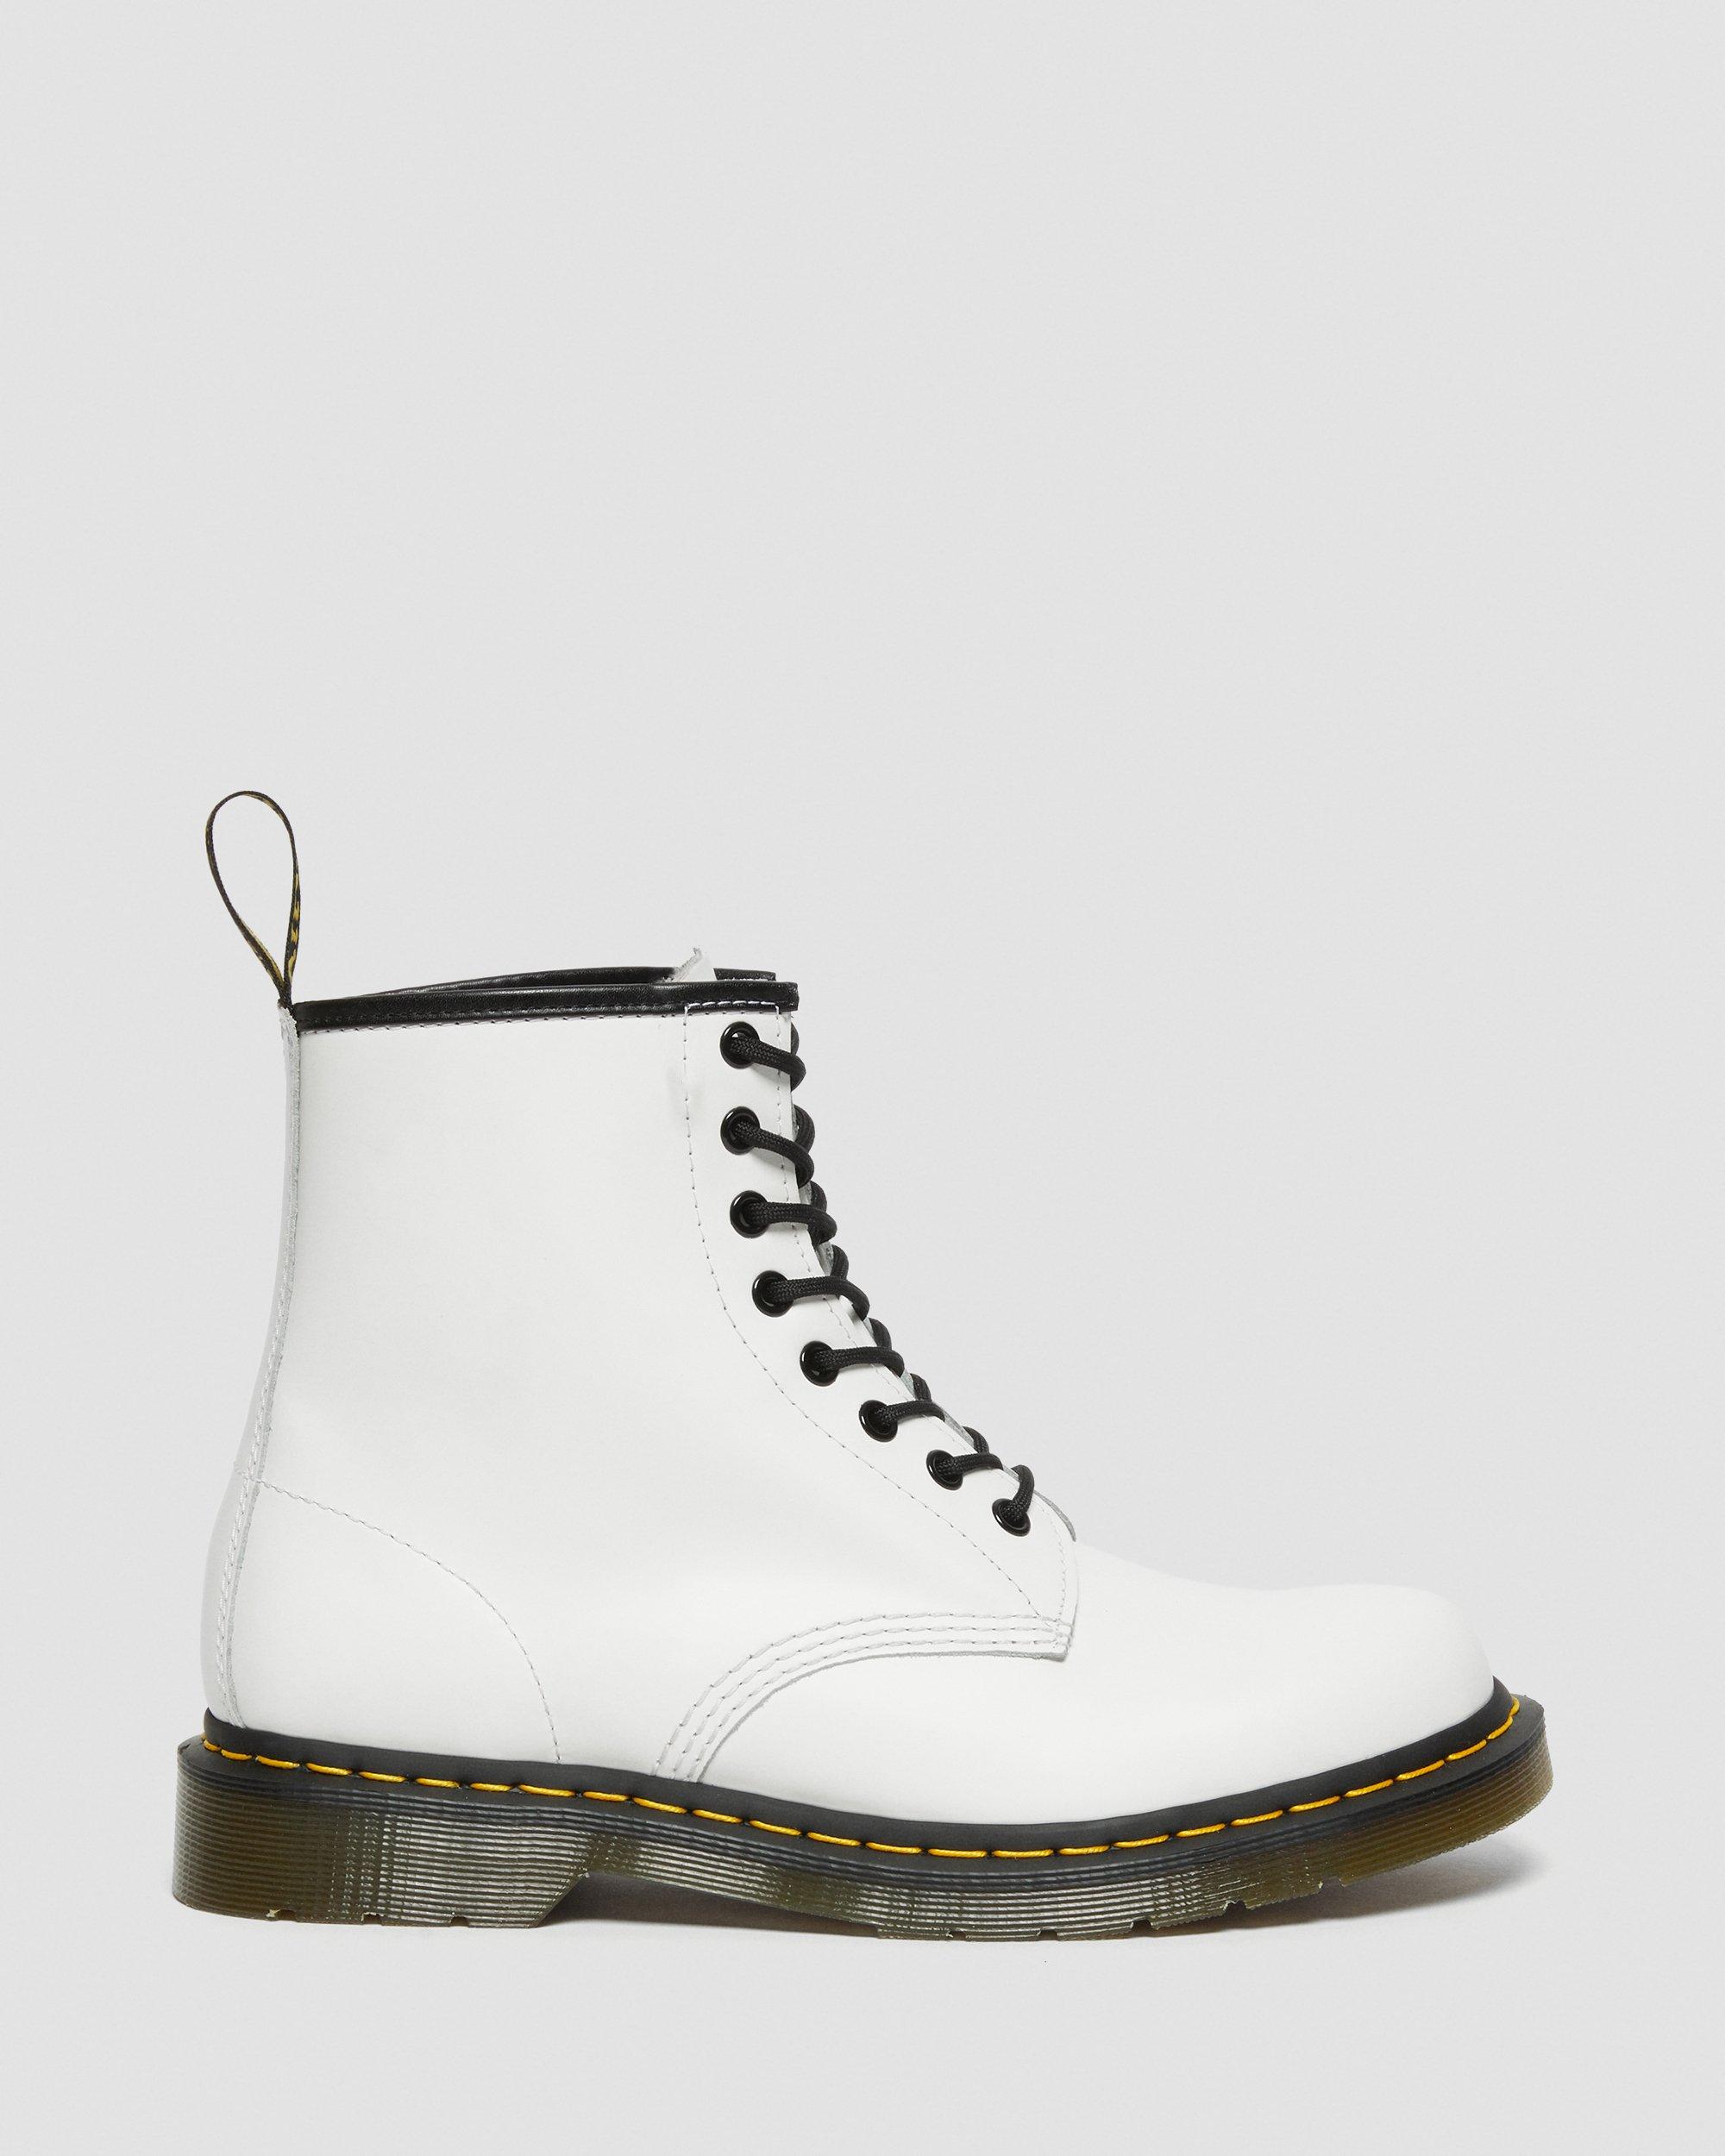 Dr. Martens, Shoes, Dr Martens Womens Lace Fashion Boot White Softy T 9